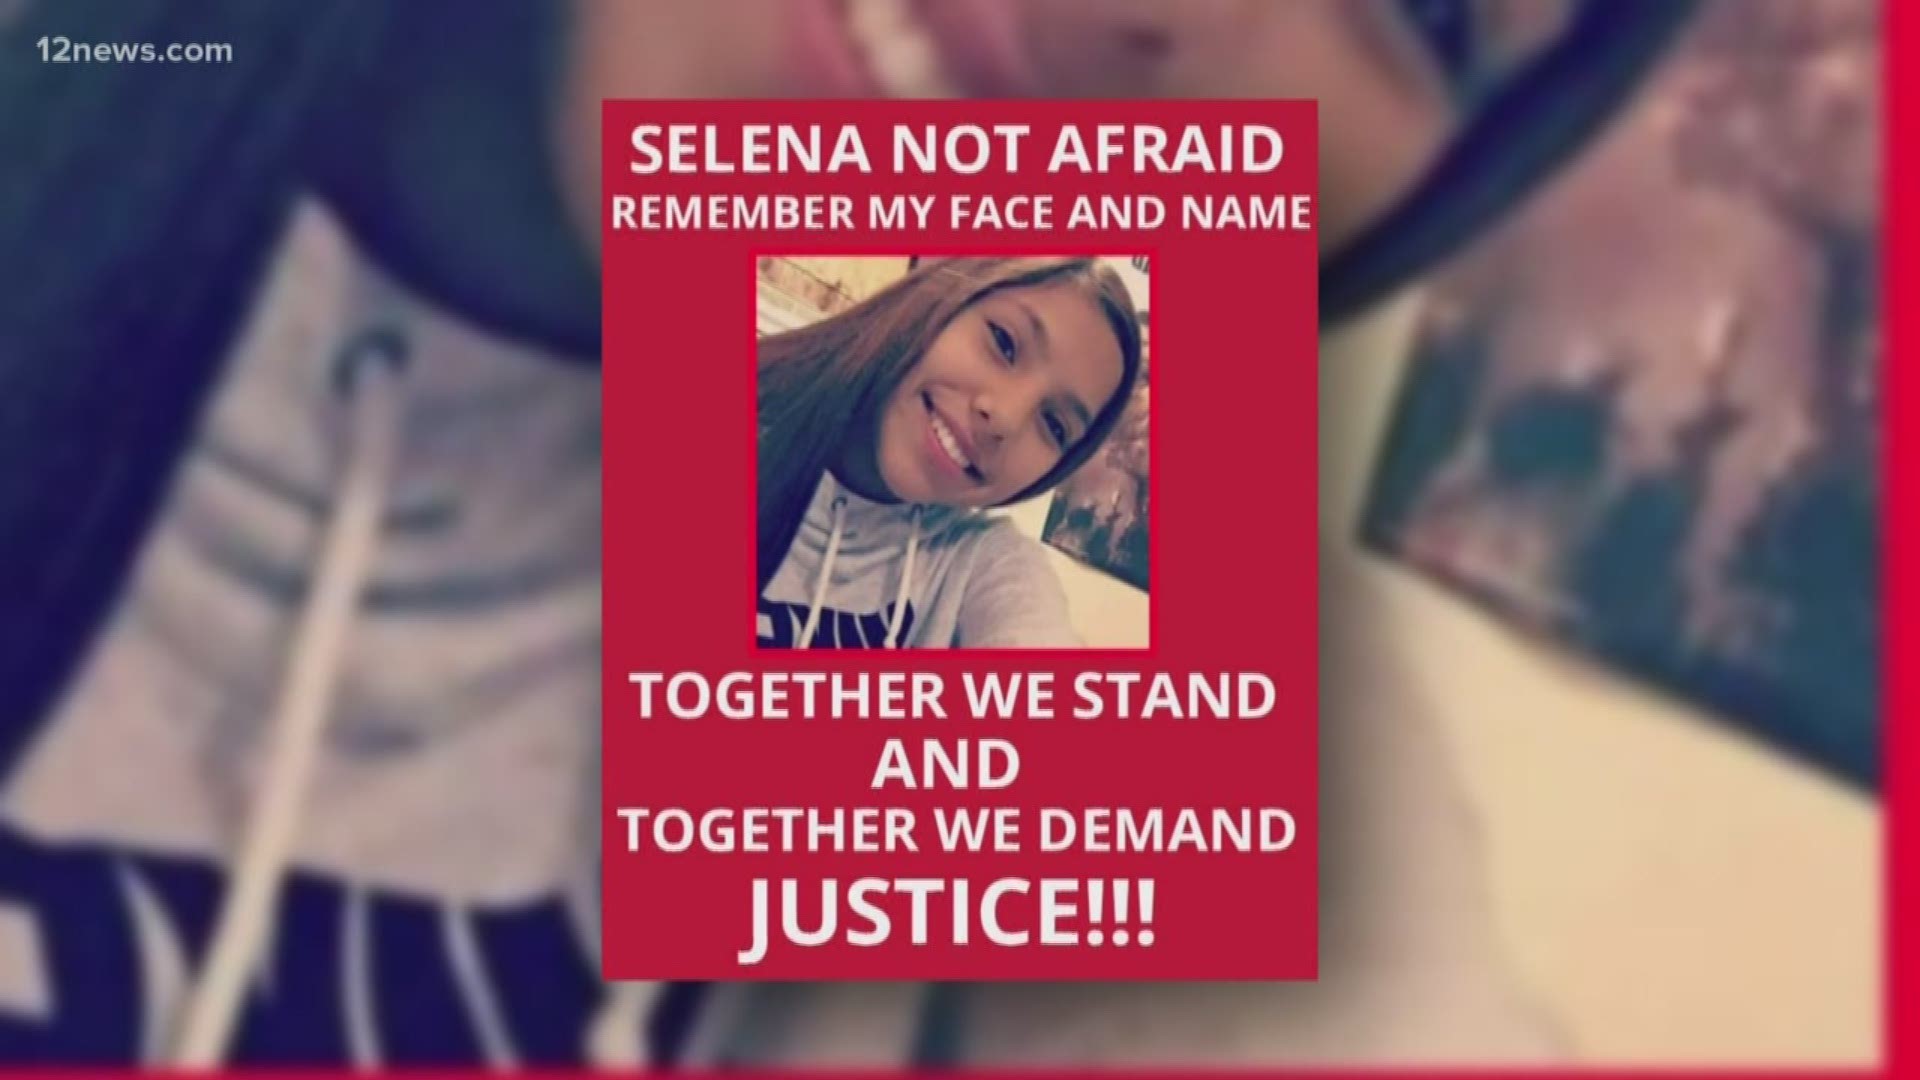 Selena Not Afraid was found dead in Montana after her car broke down. The attendees of her memorial believe that not enough is being done to protect indigenous women